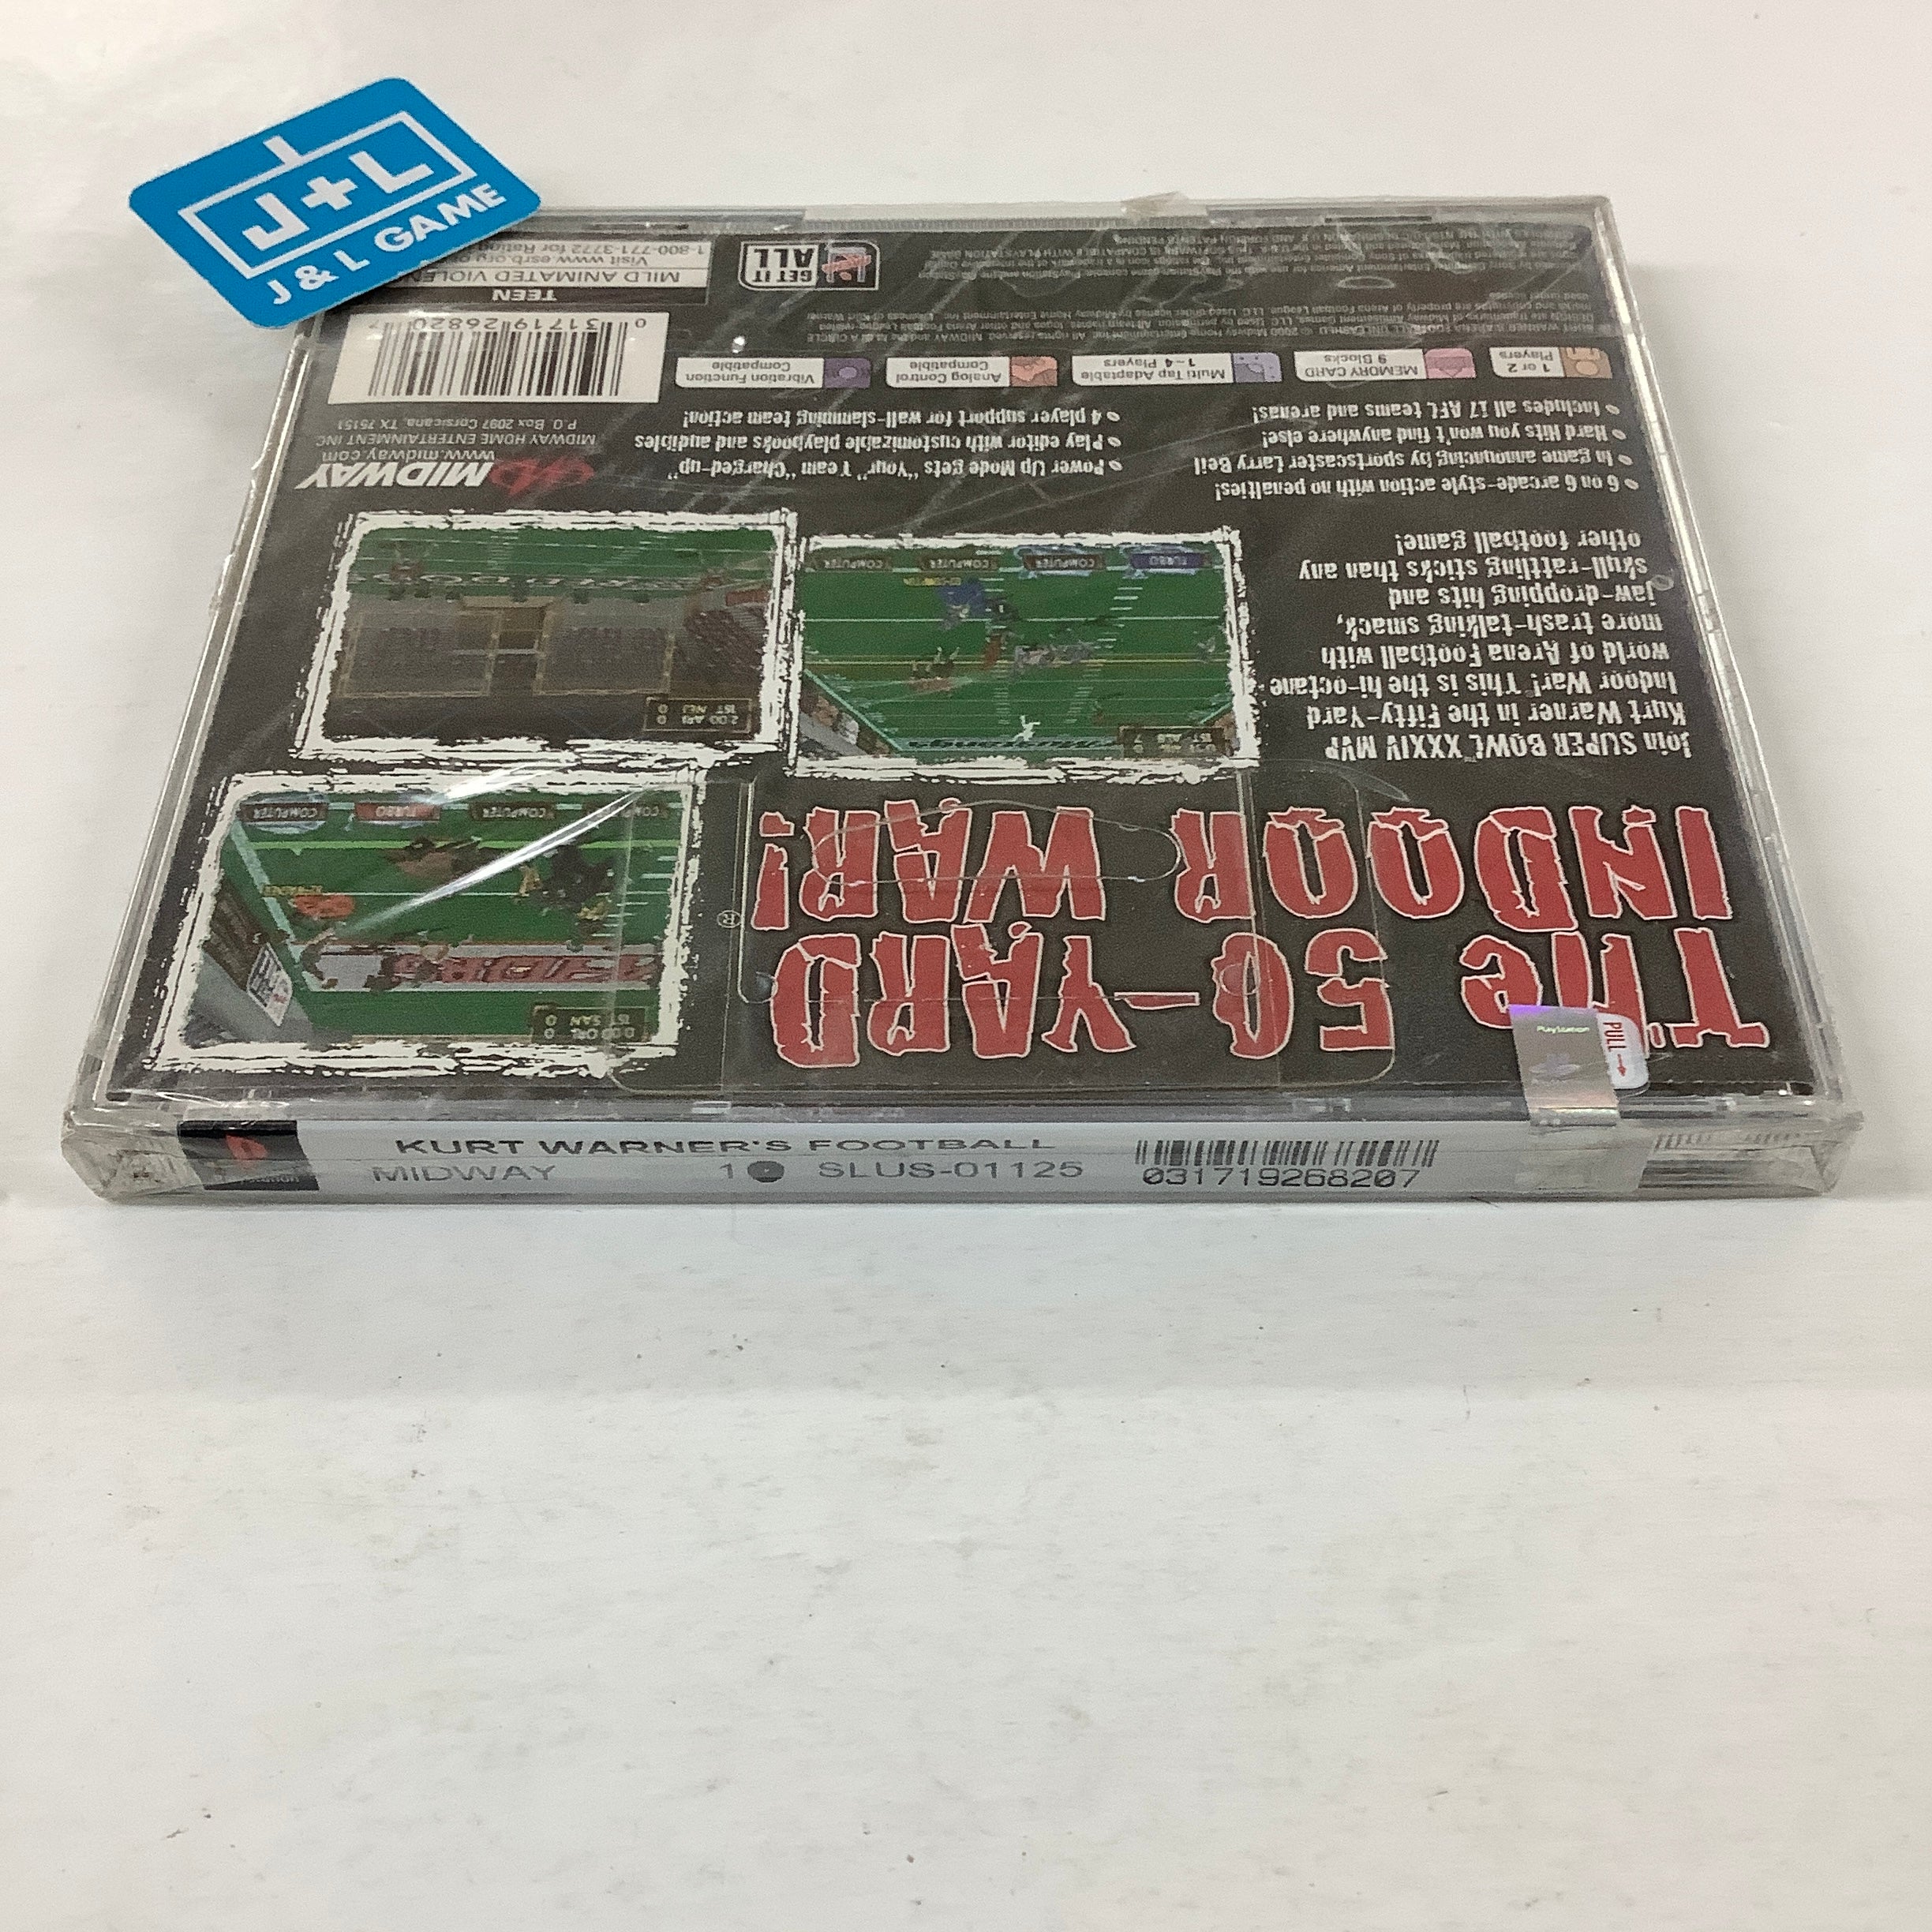 Kurt Warner's Arena Football Unleashed - (PS1) PlayStation 1 Video Games Midway   